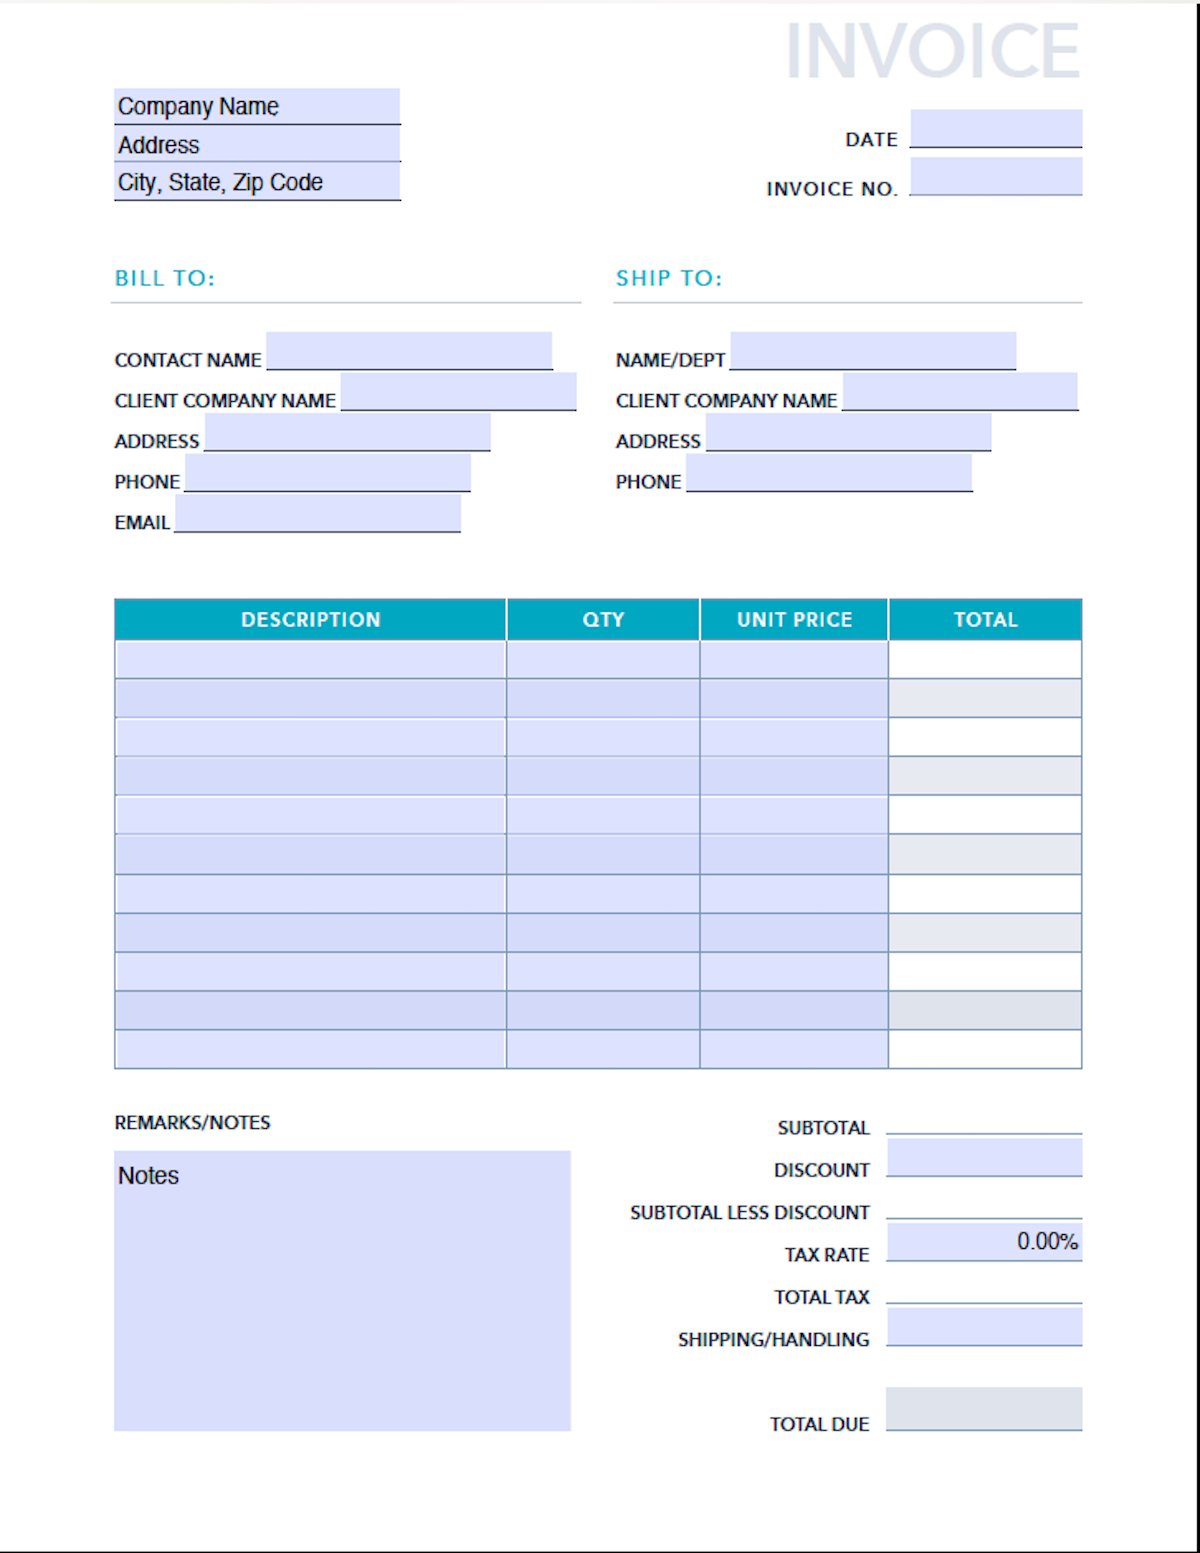 Free Invoices & Receipts Pdf & Excel Template | Hubspot Intended For Free Business Invoice Template Downloads